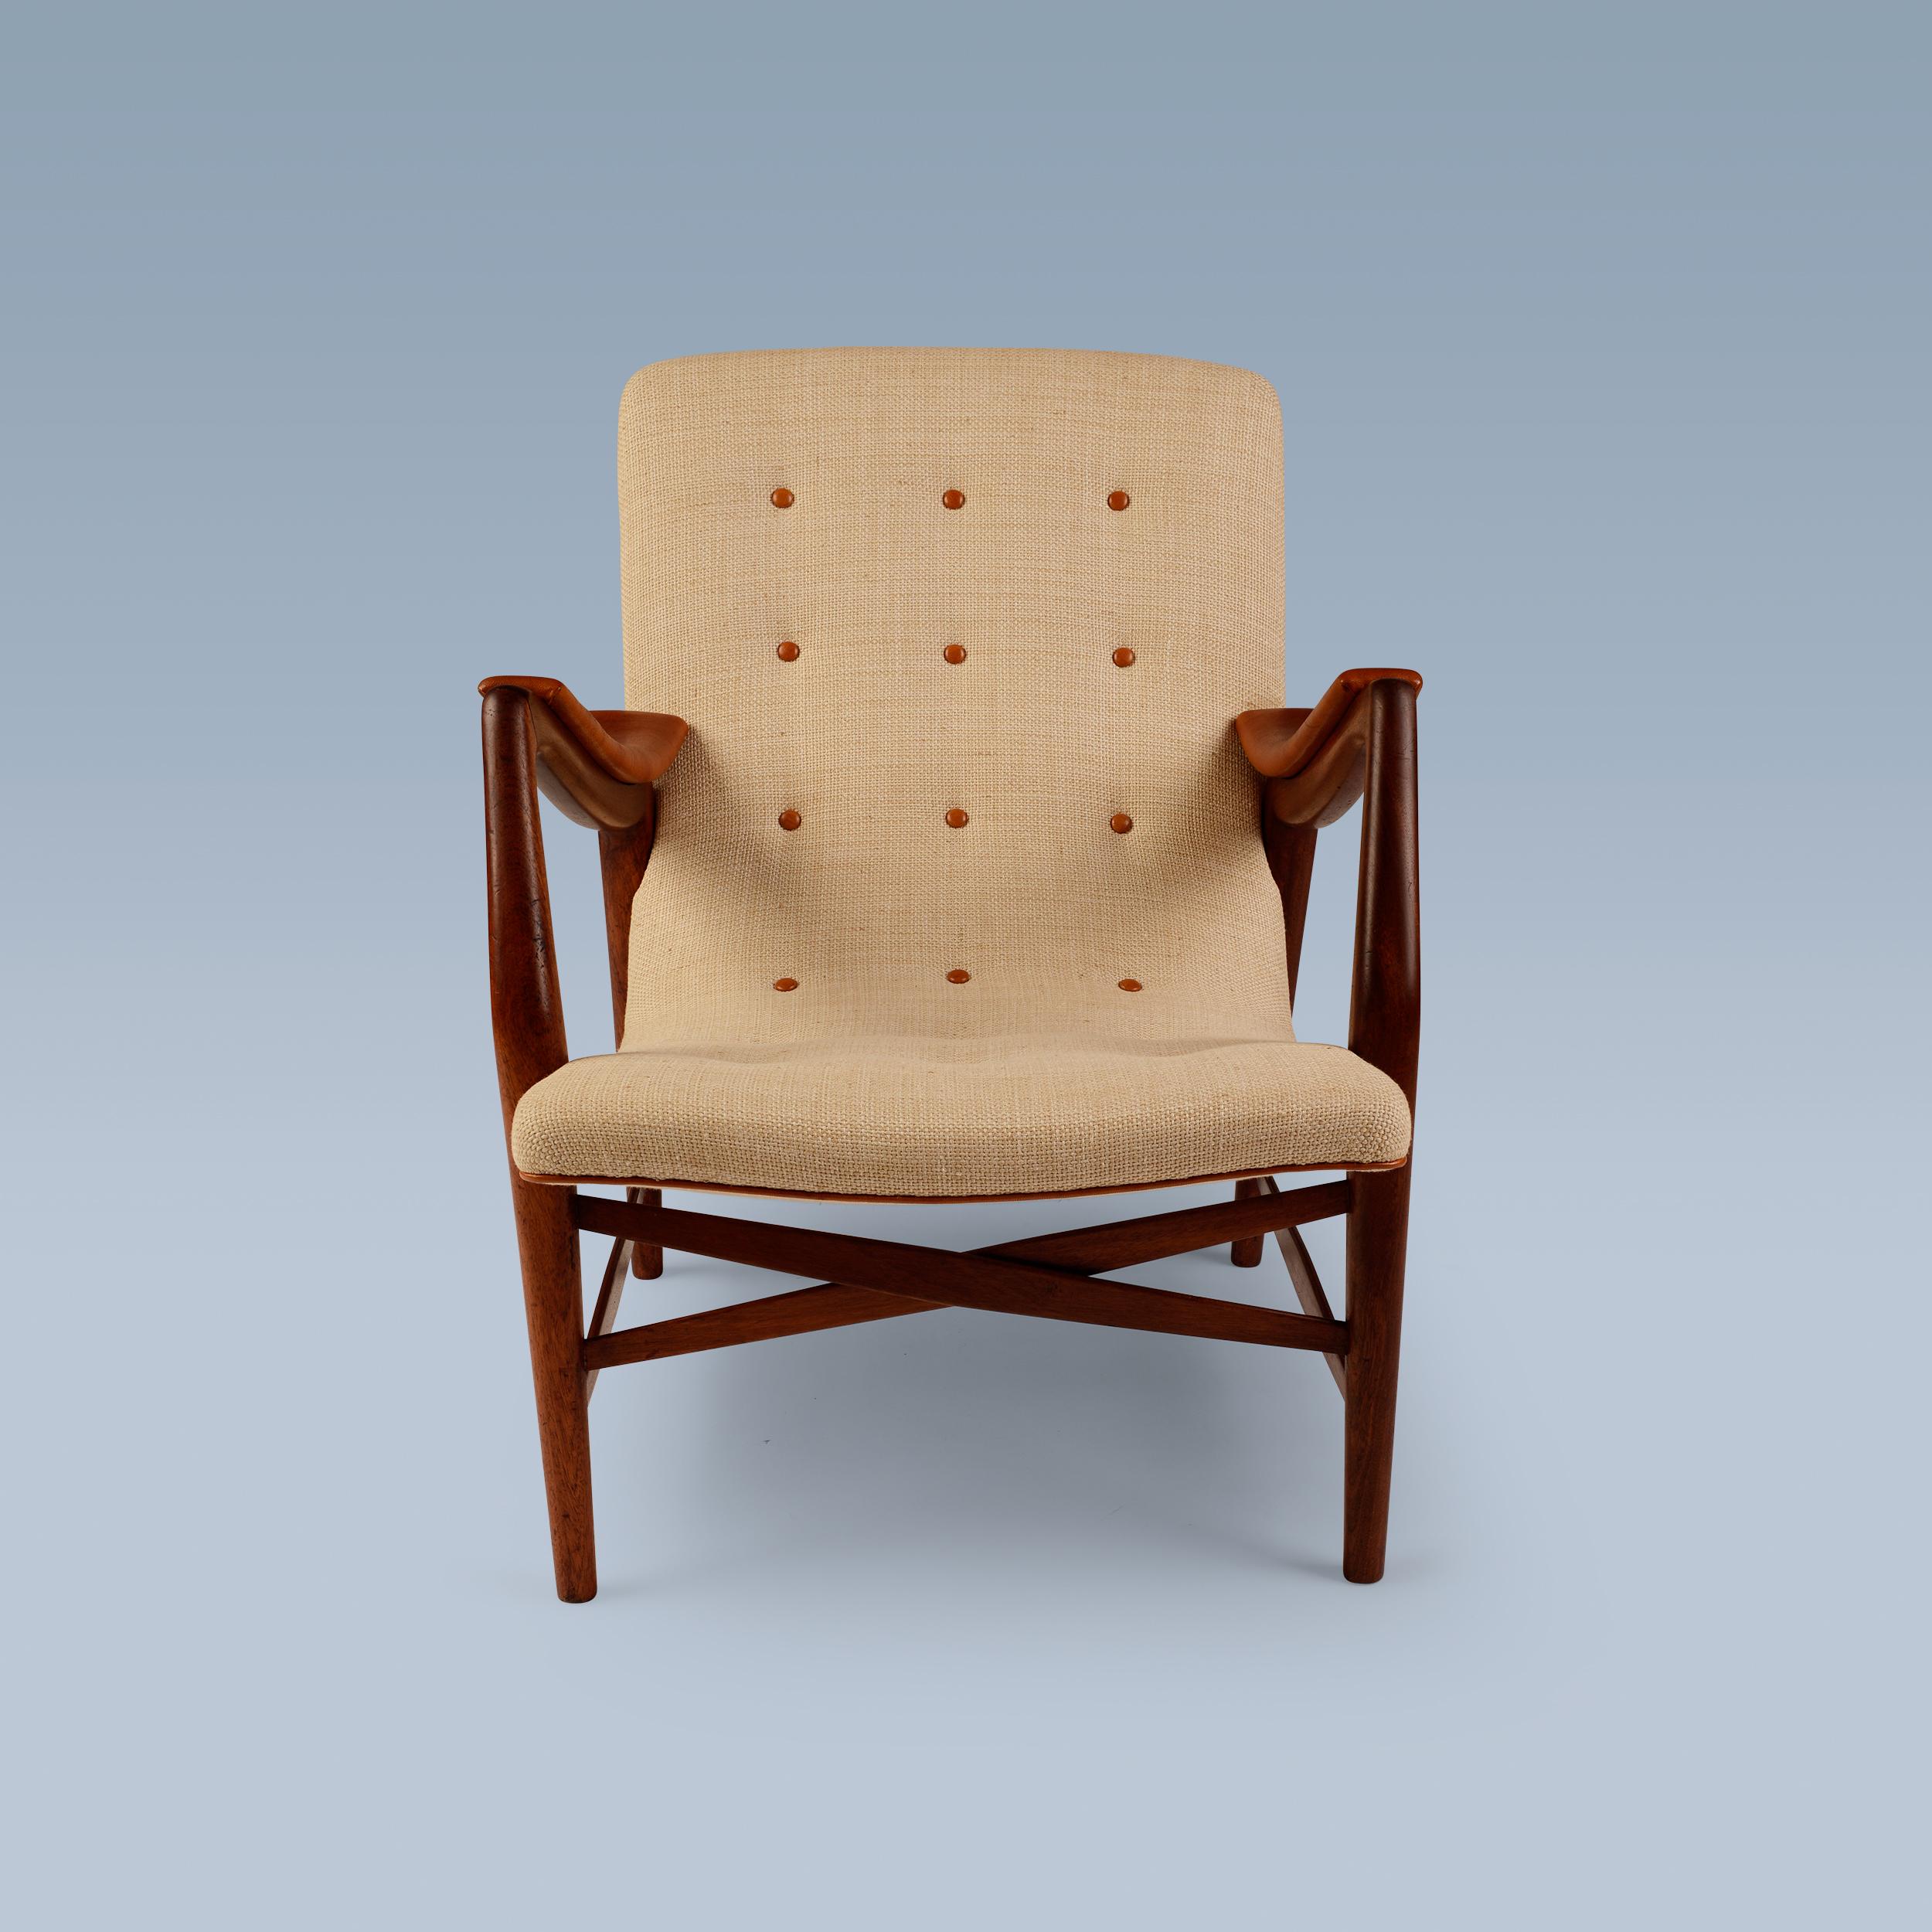 Teak chair with curvy seat upholstered with light fabric and leather details For Sale 7